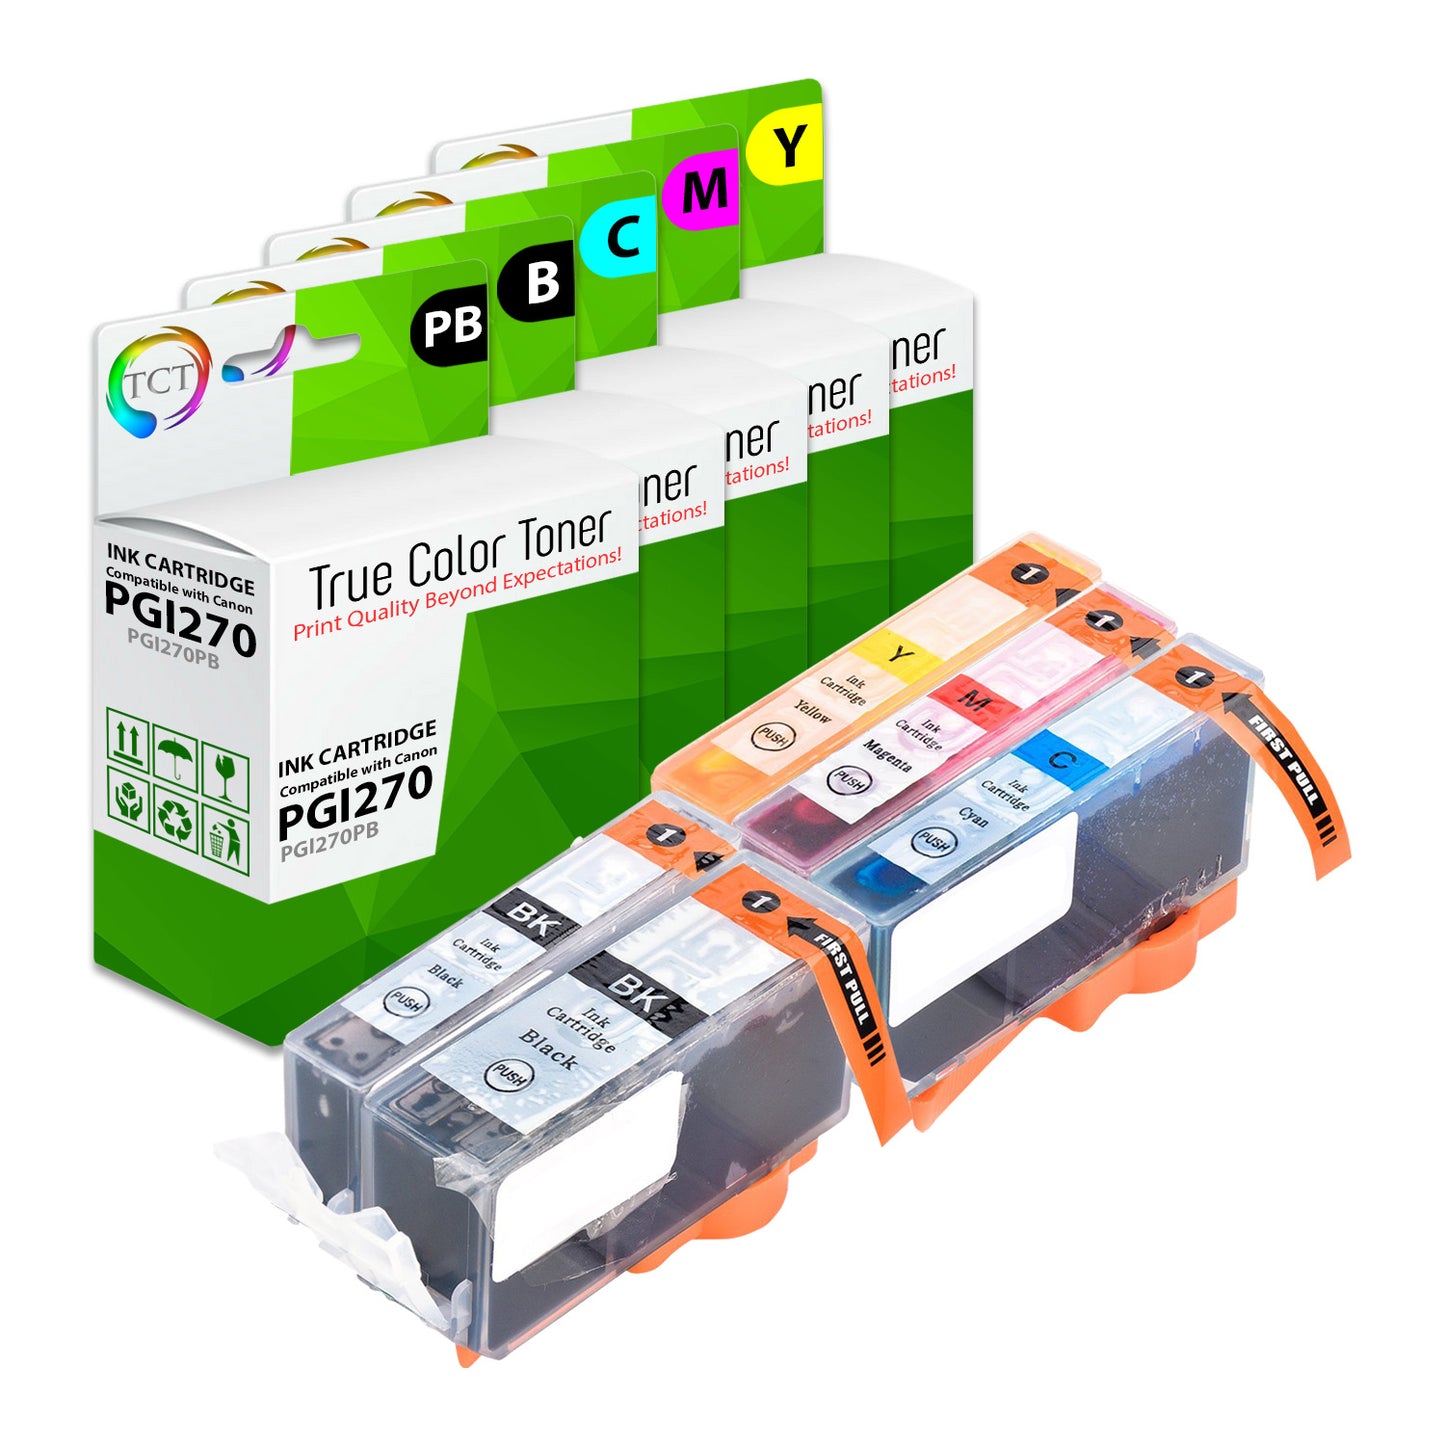 TCT Compatible Ink Cartridge Replacement for the Canon PGI-270 CLI-271 Series - 5 Pack (PB,BCMY)